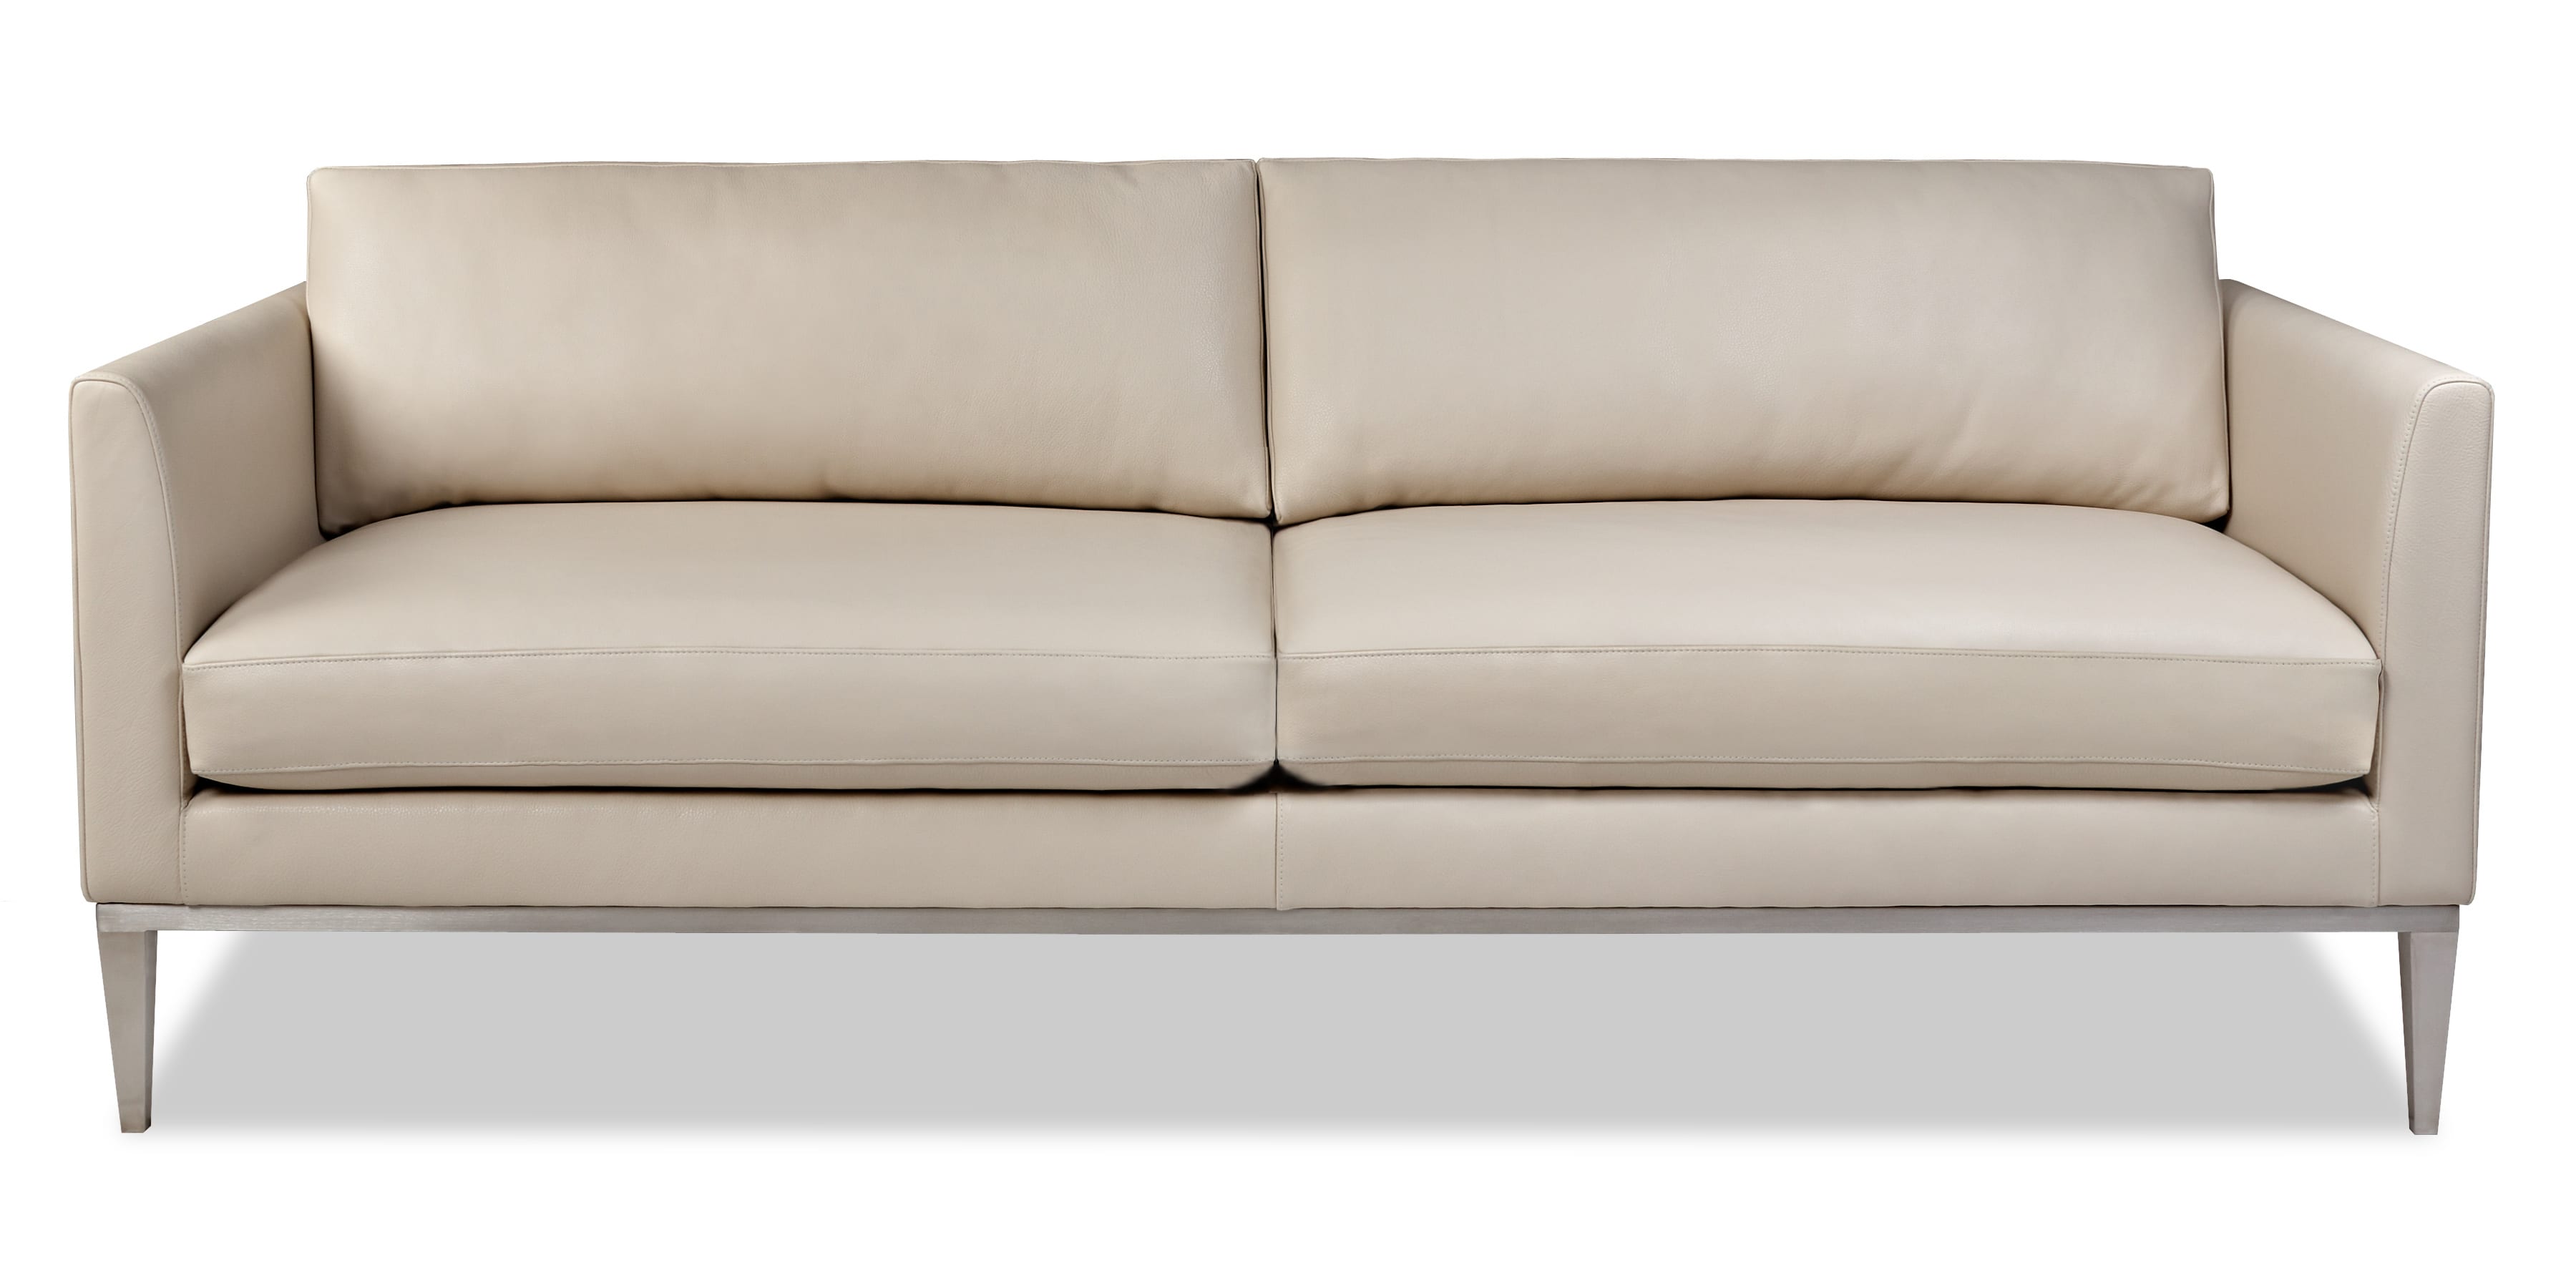 american leather henley sofa reviews